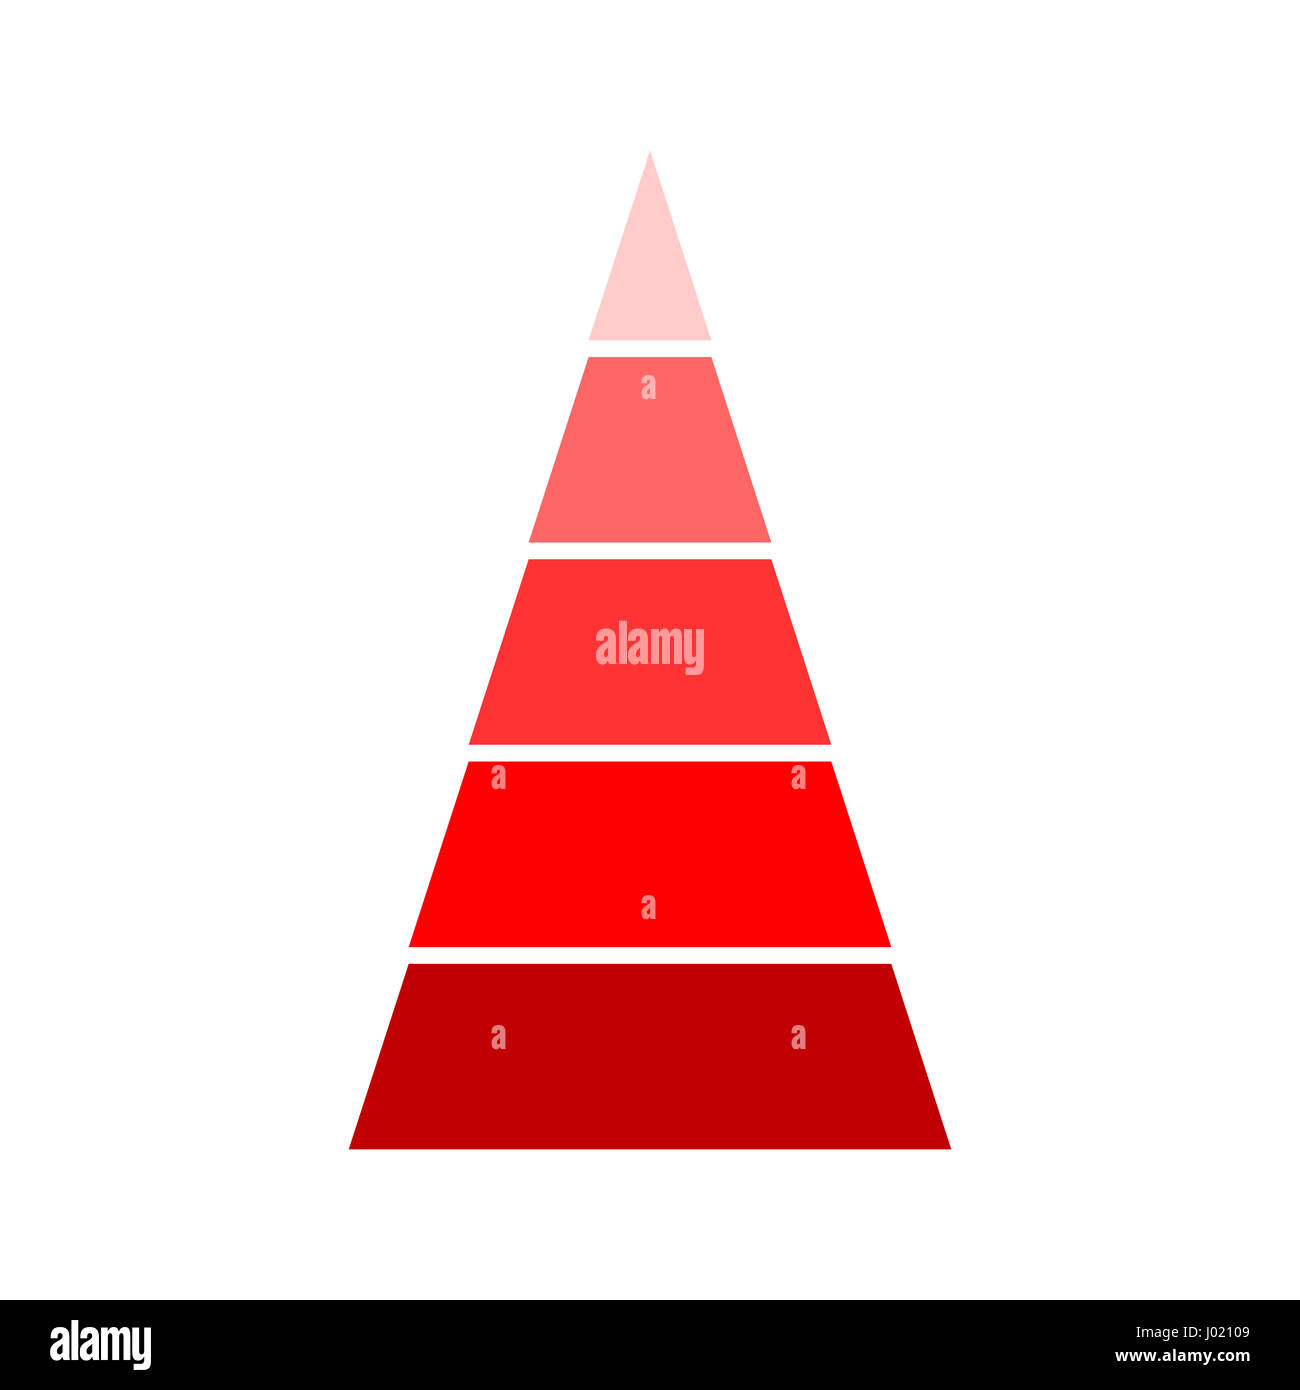 Stacked Pyramid Chart Template 1 Stock Illustration - Download